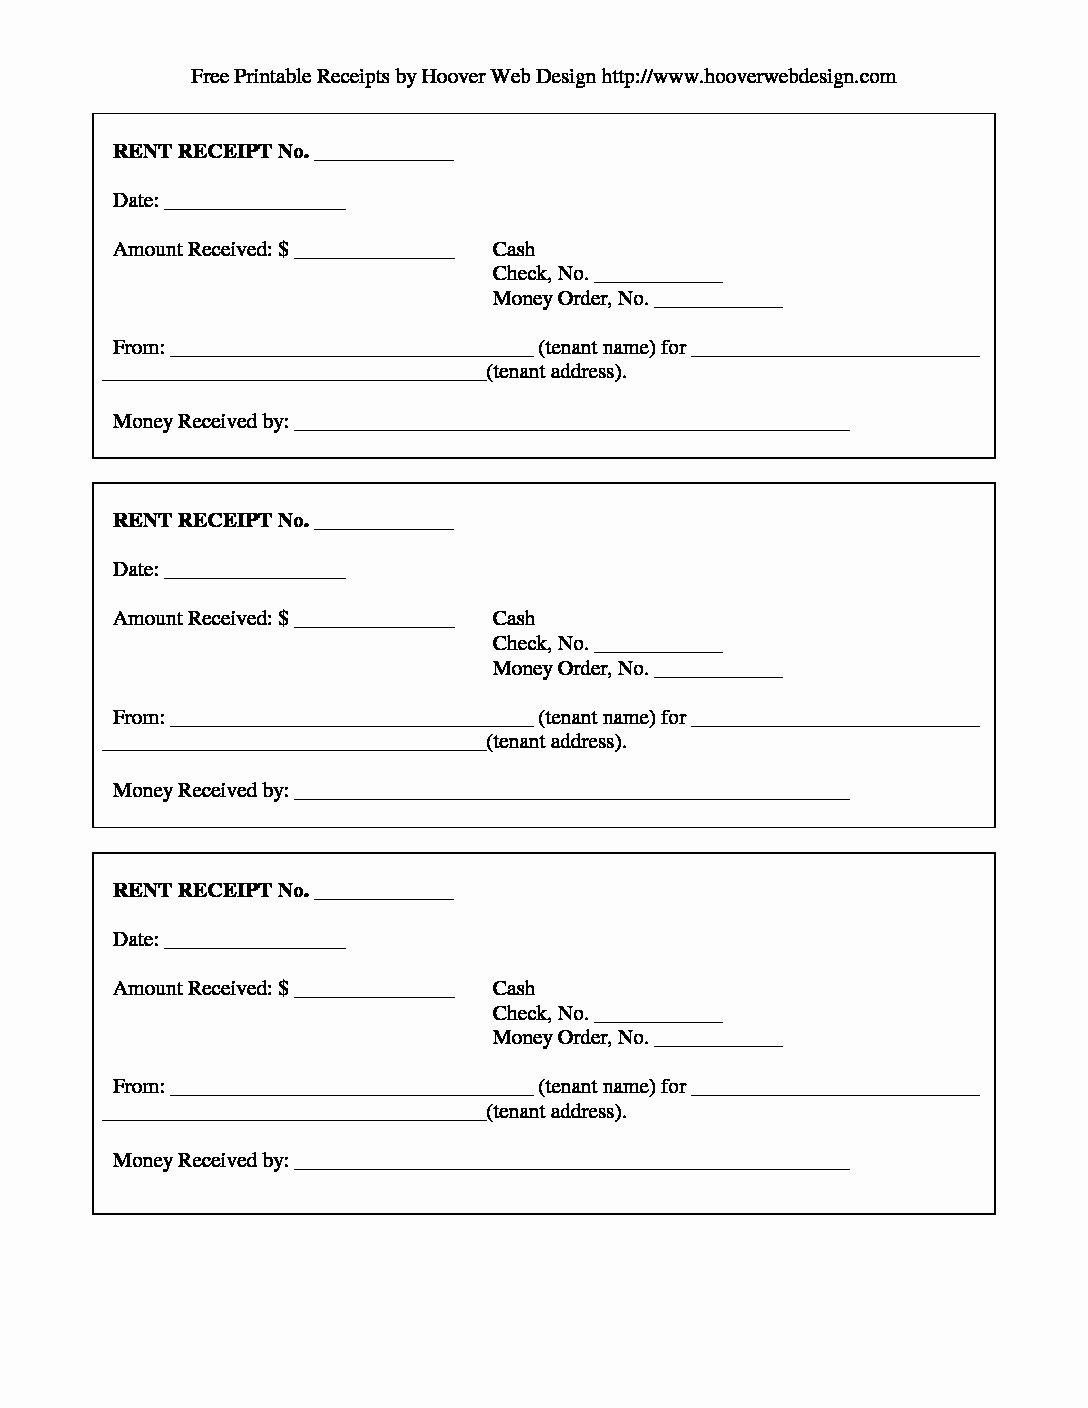 Rent Receipt Template Free Unique Free Rent Receipt Template and What Information to Include